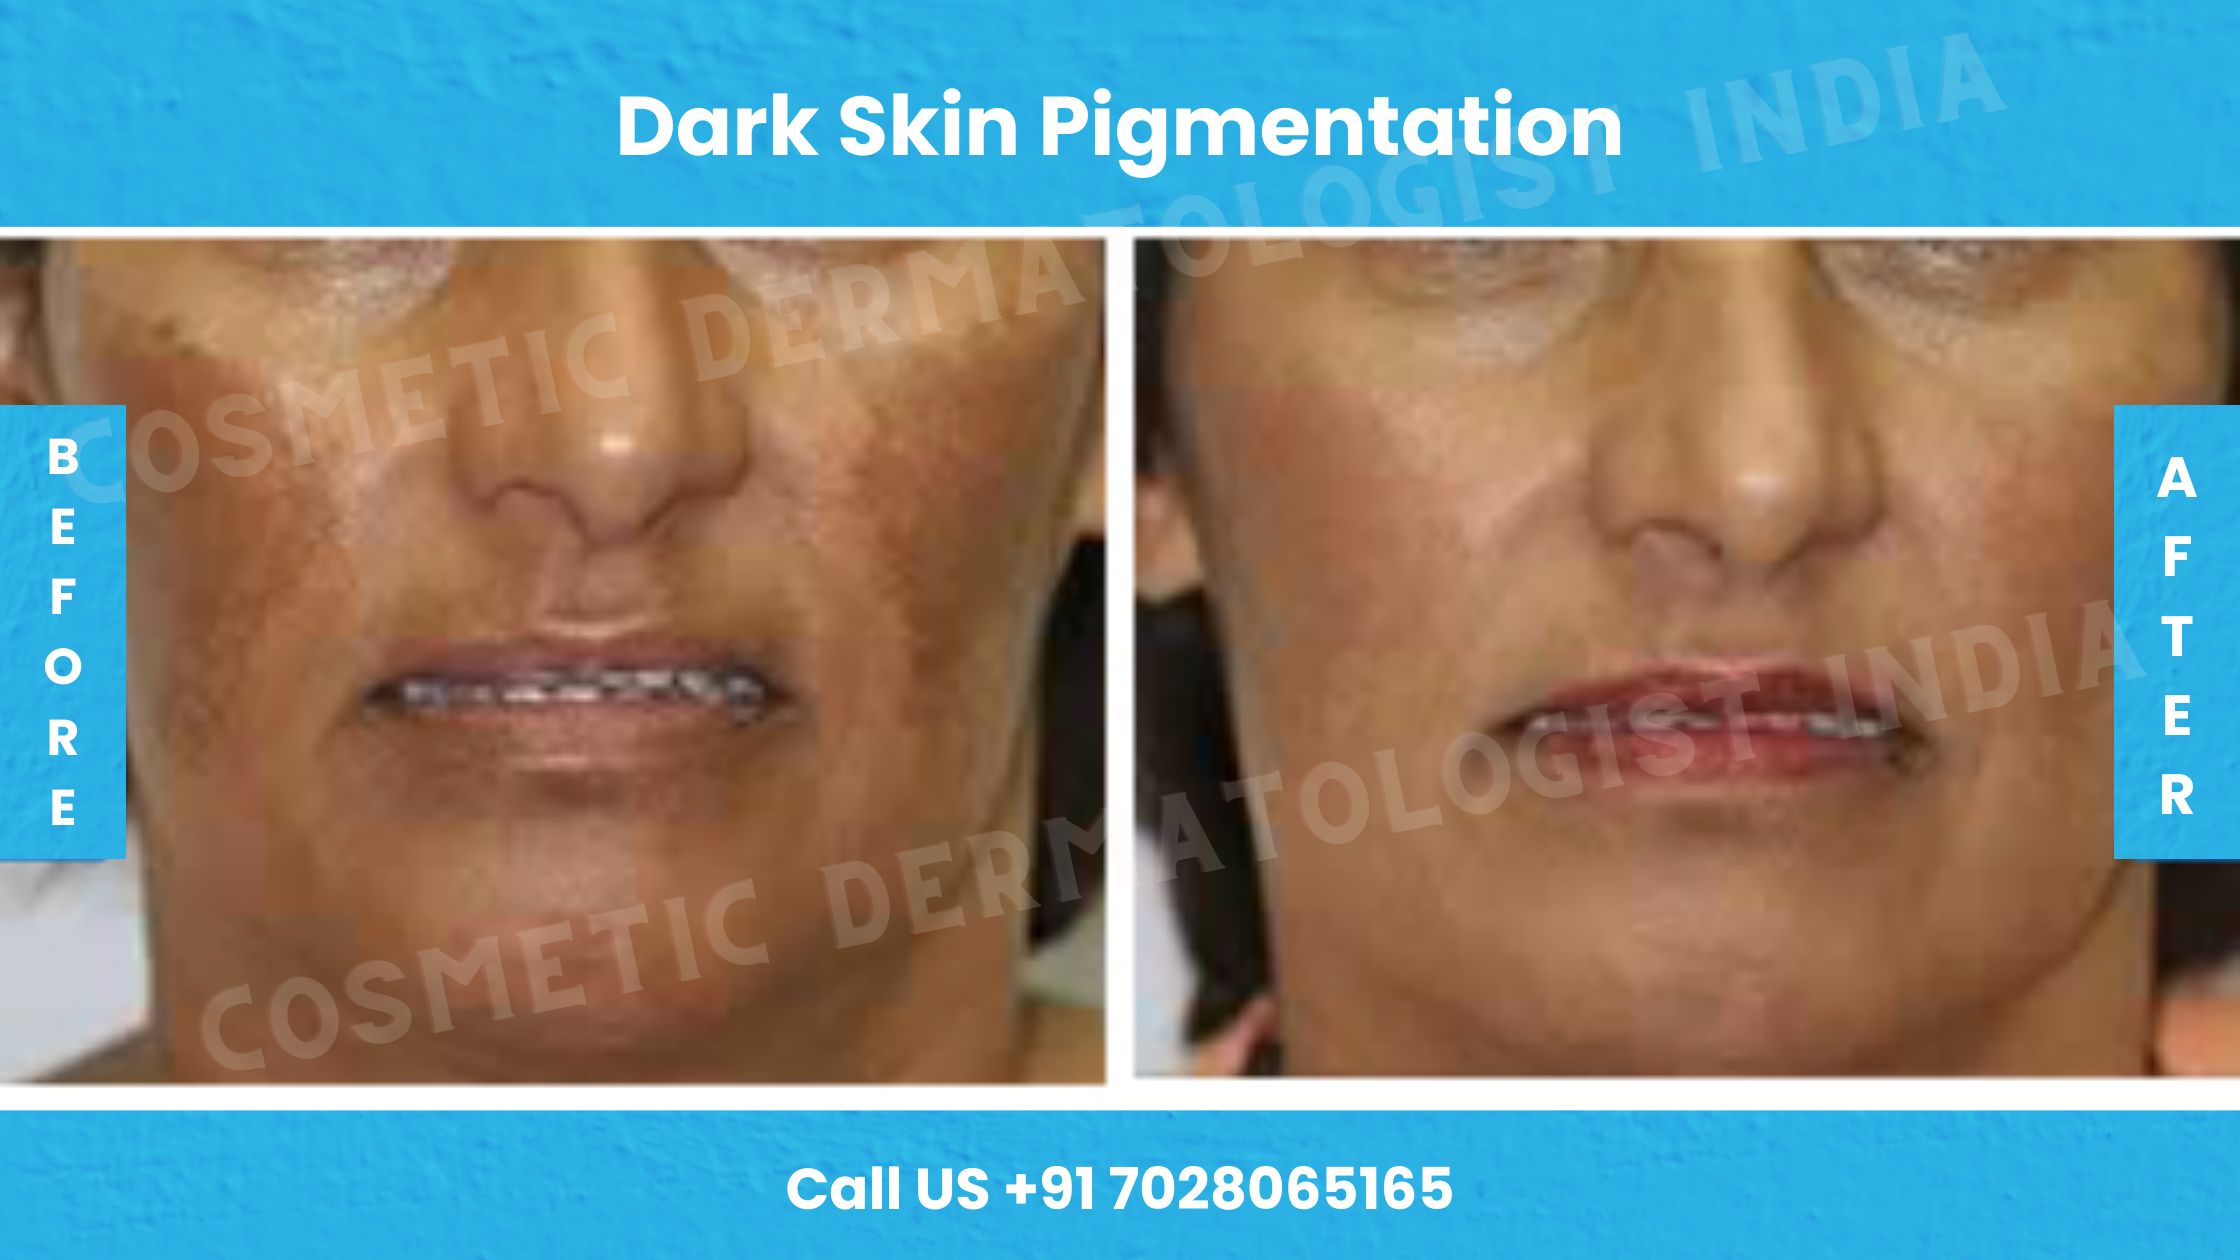 Before and After Images of Dark Skin Pigmentation